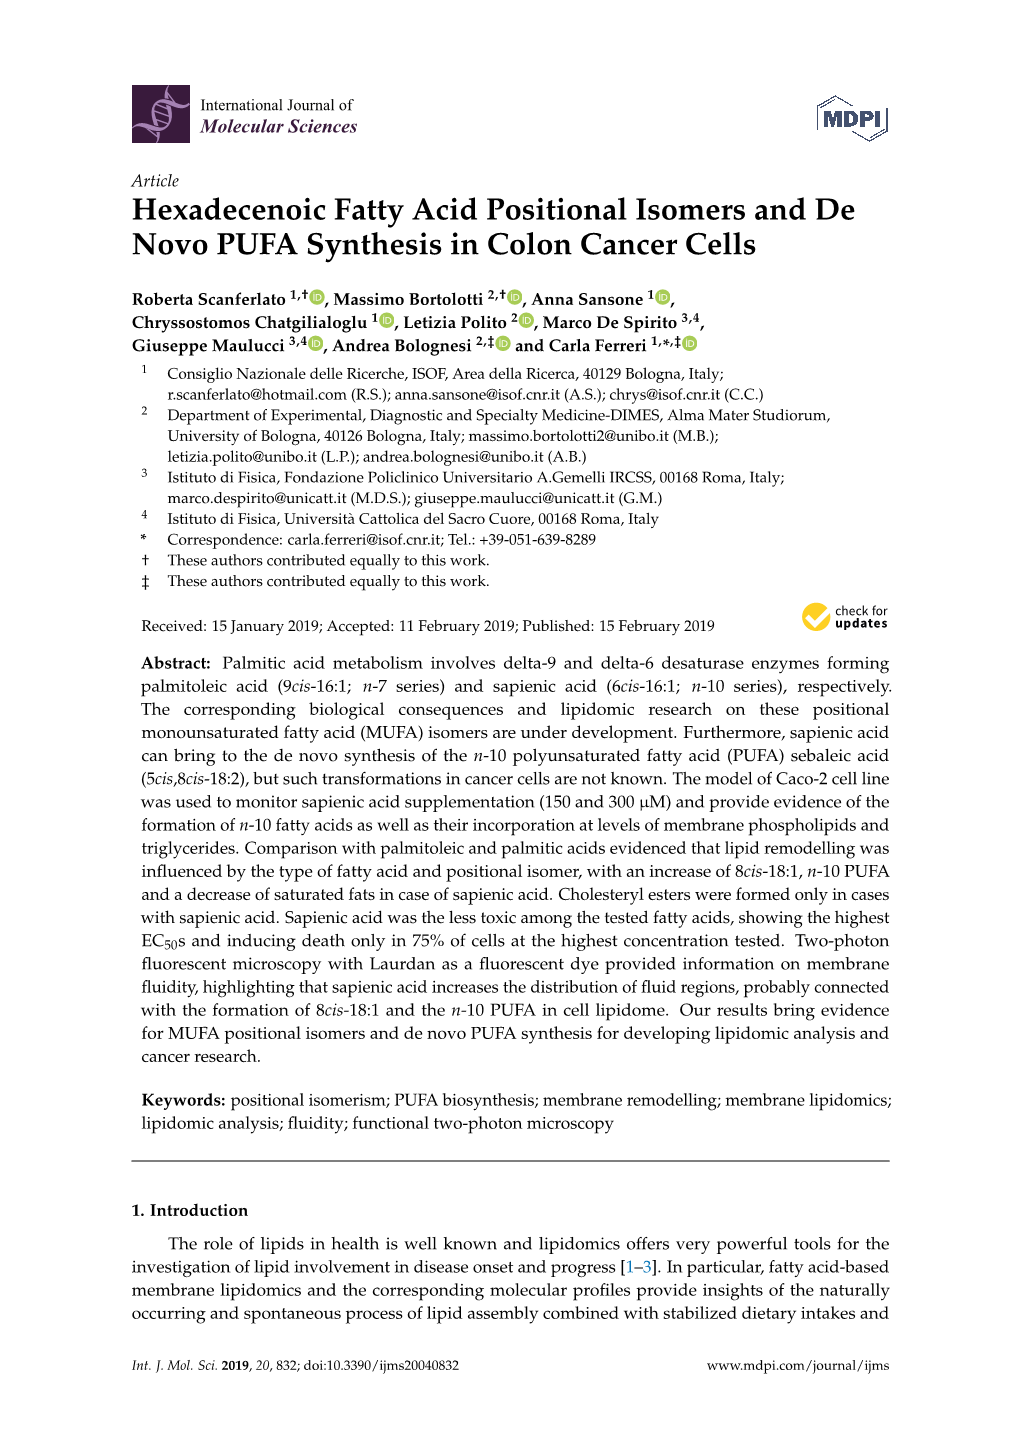 Hexadecenoic Fatty Acid Positional Isomers and De Novo PUFA Synthesis in Colon Cancer Cells